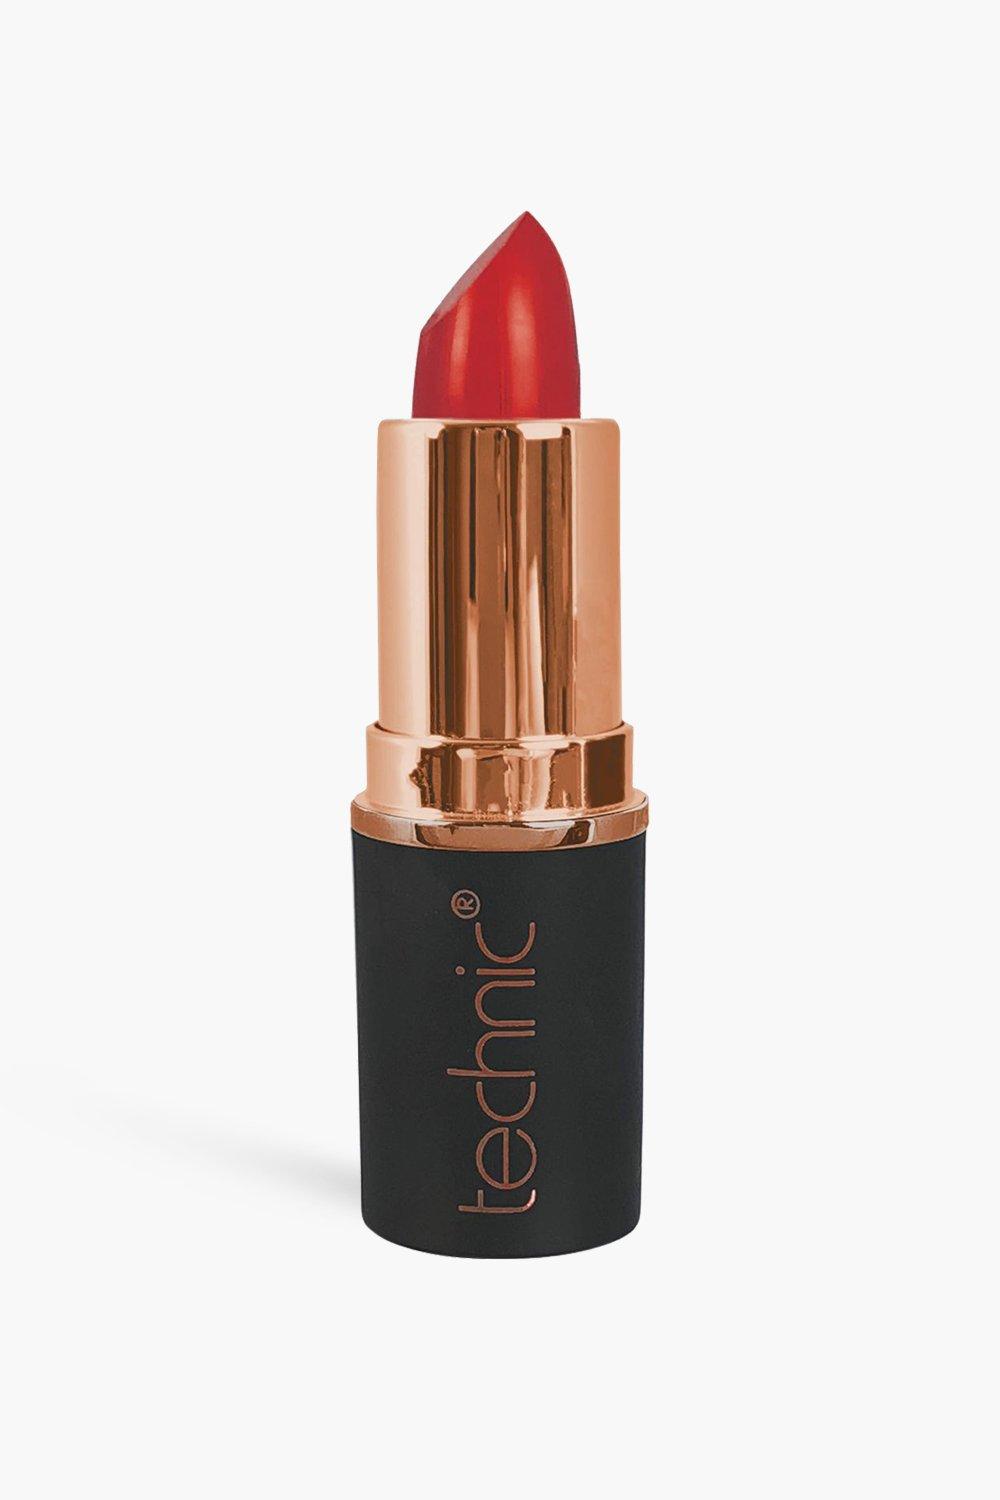 Image of Rossetto Technic - Heartbeat, Rosso